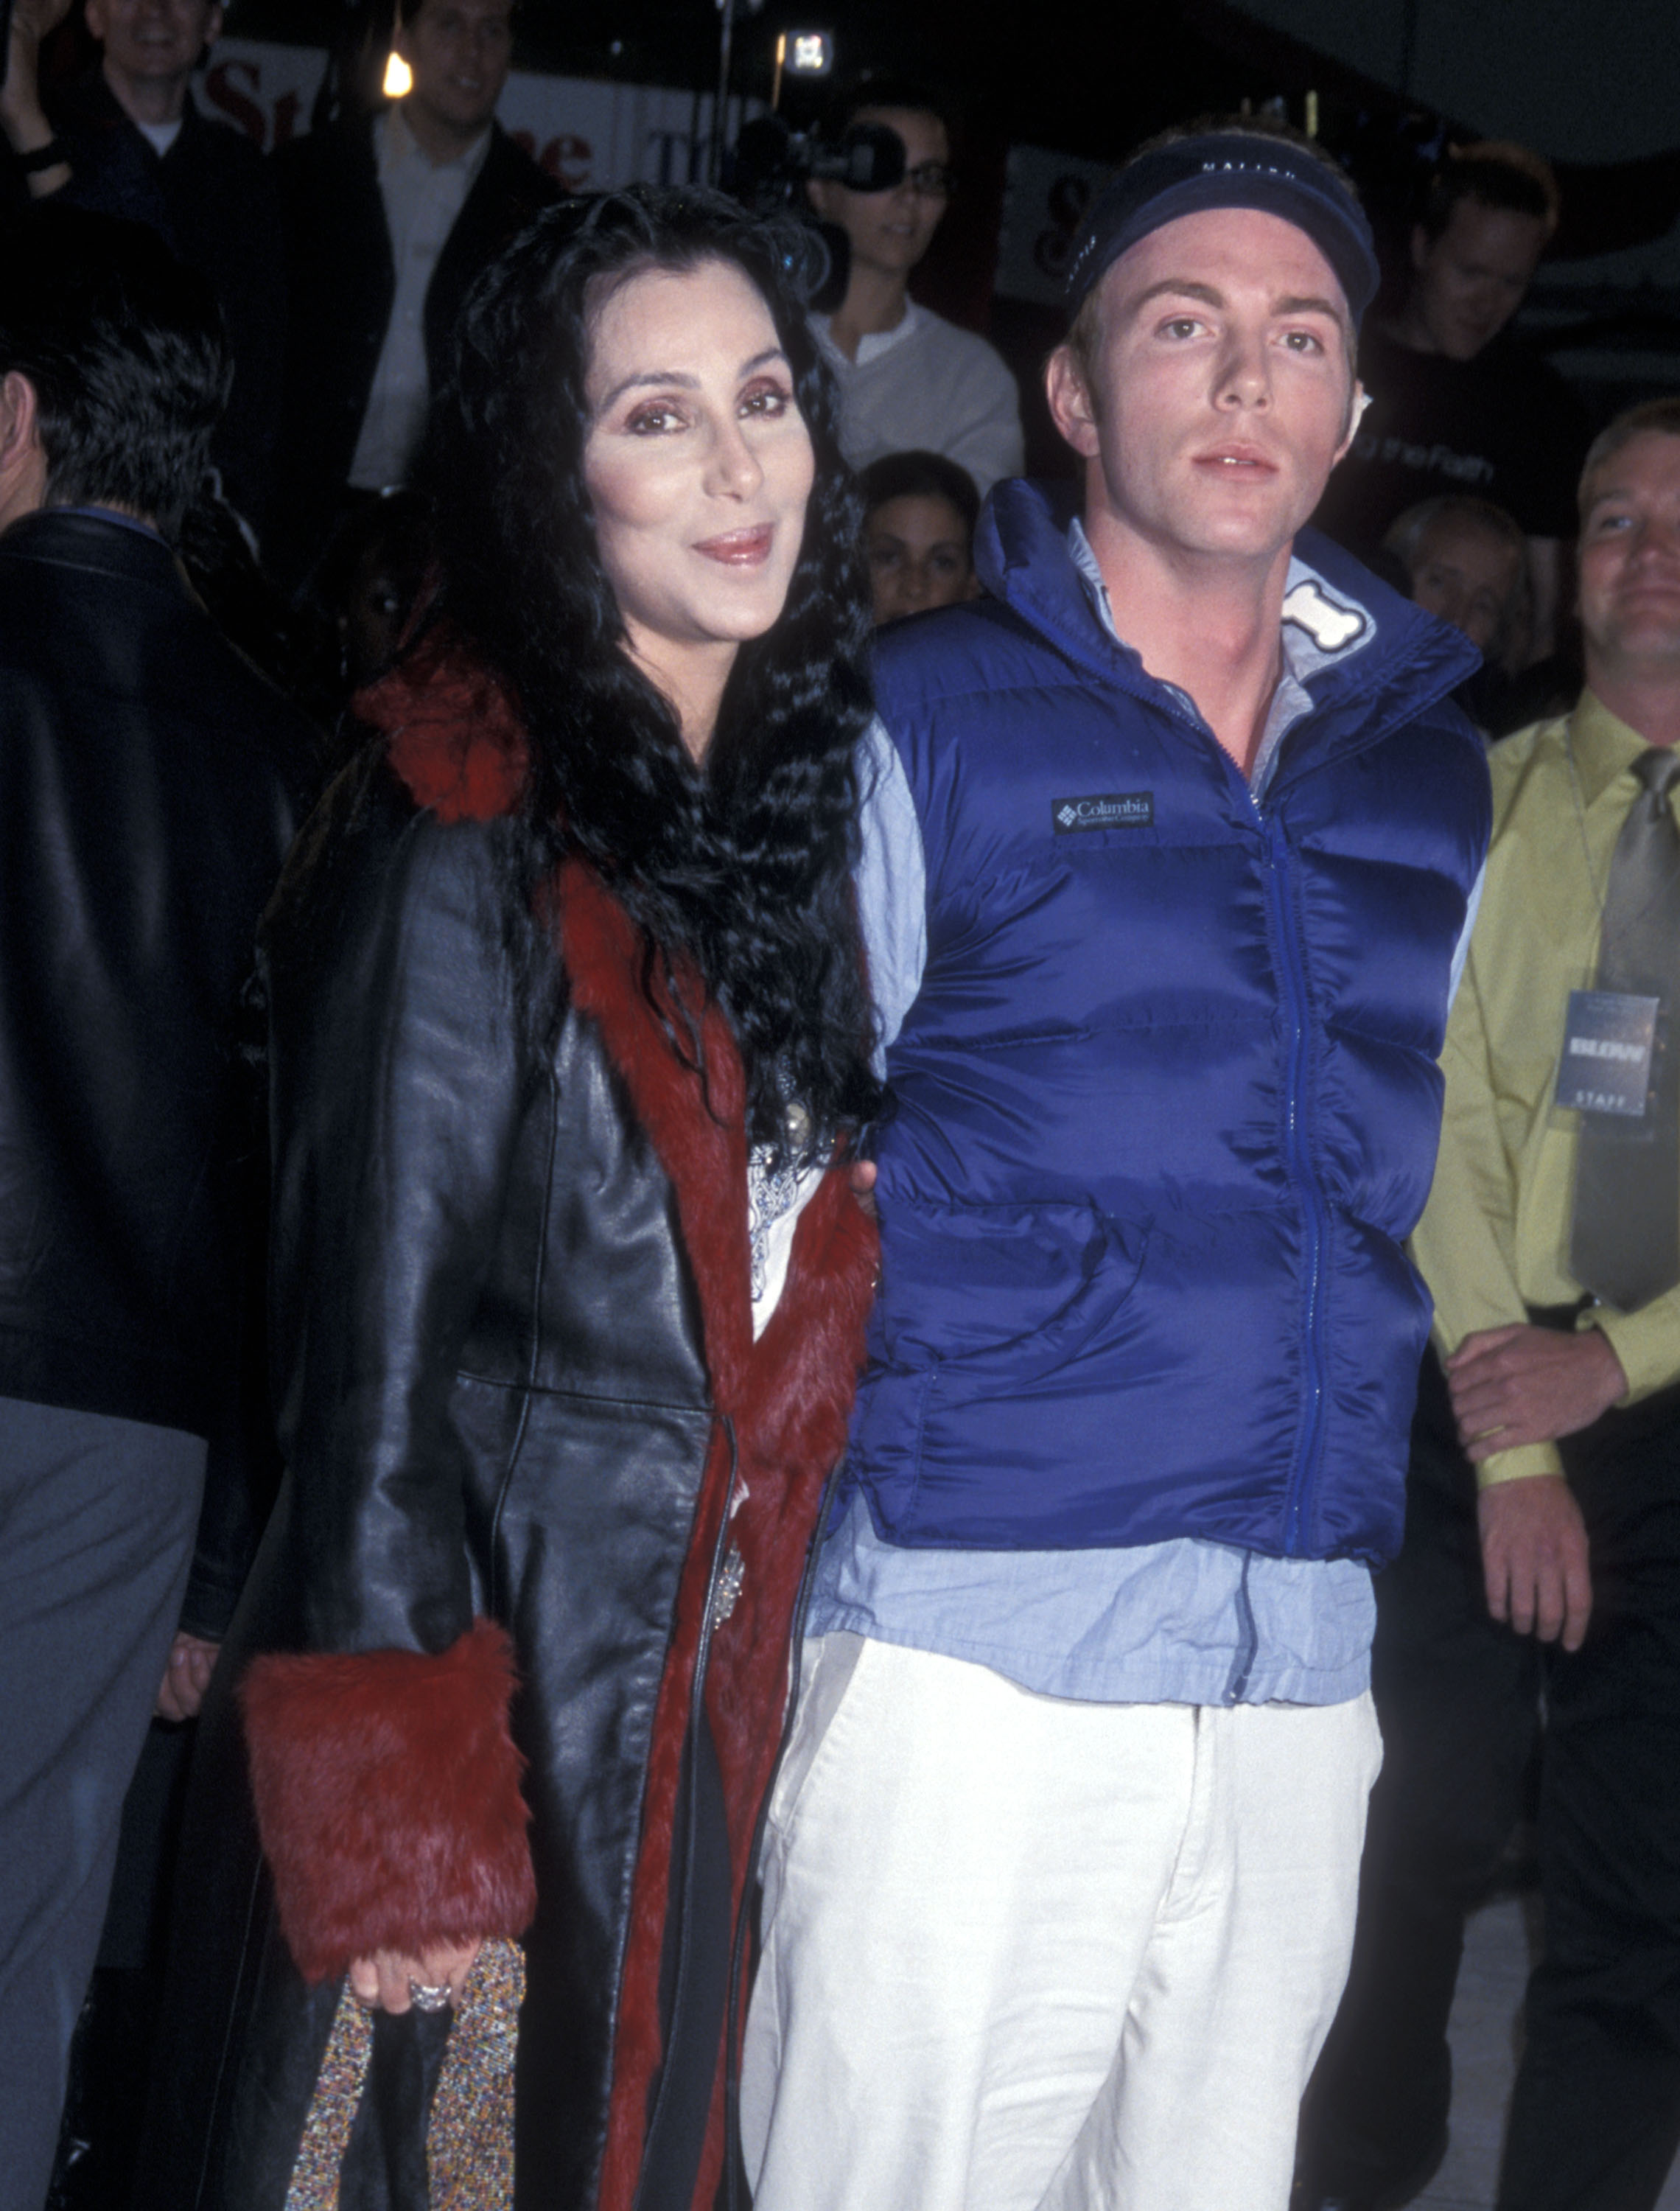 Elijah Blue Allman and Cher at the premiere of "Blow" in Hollywood in 2001 | Source: Getty Images